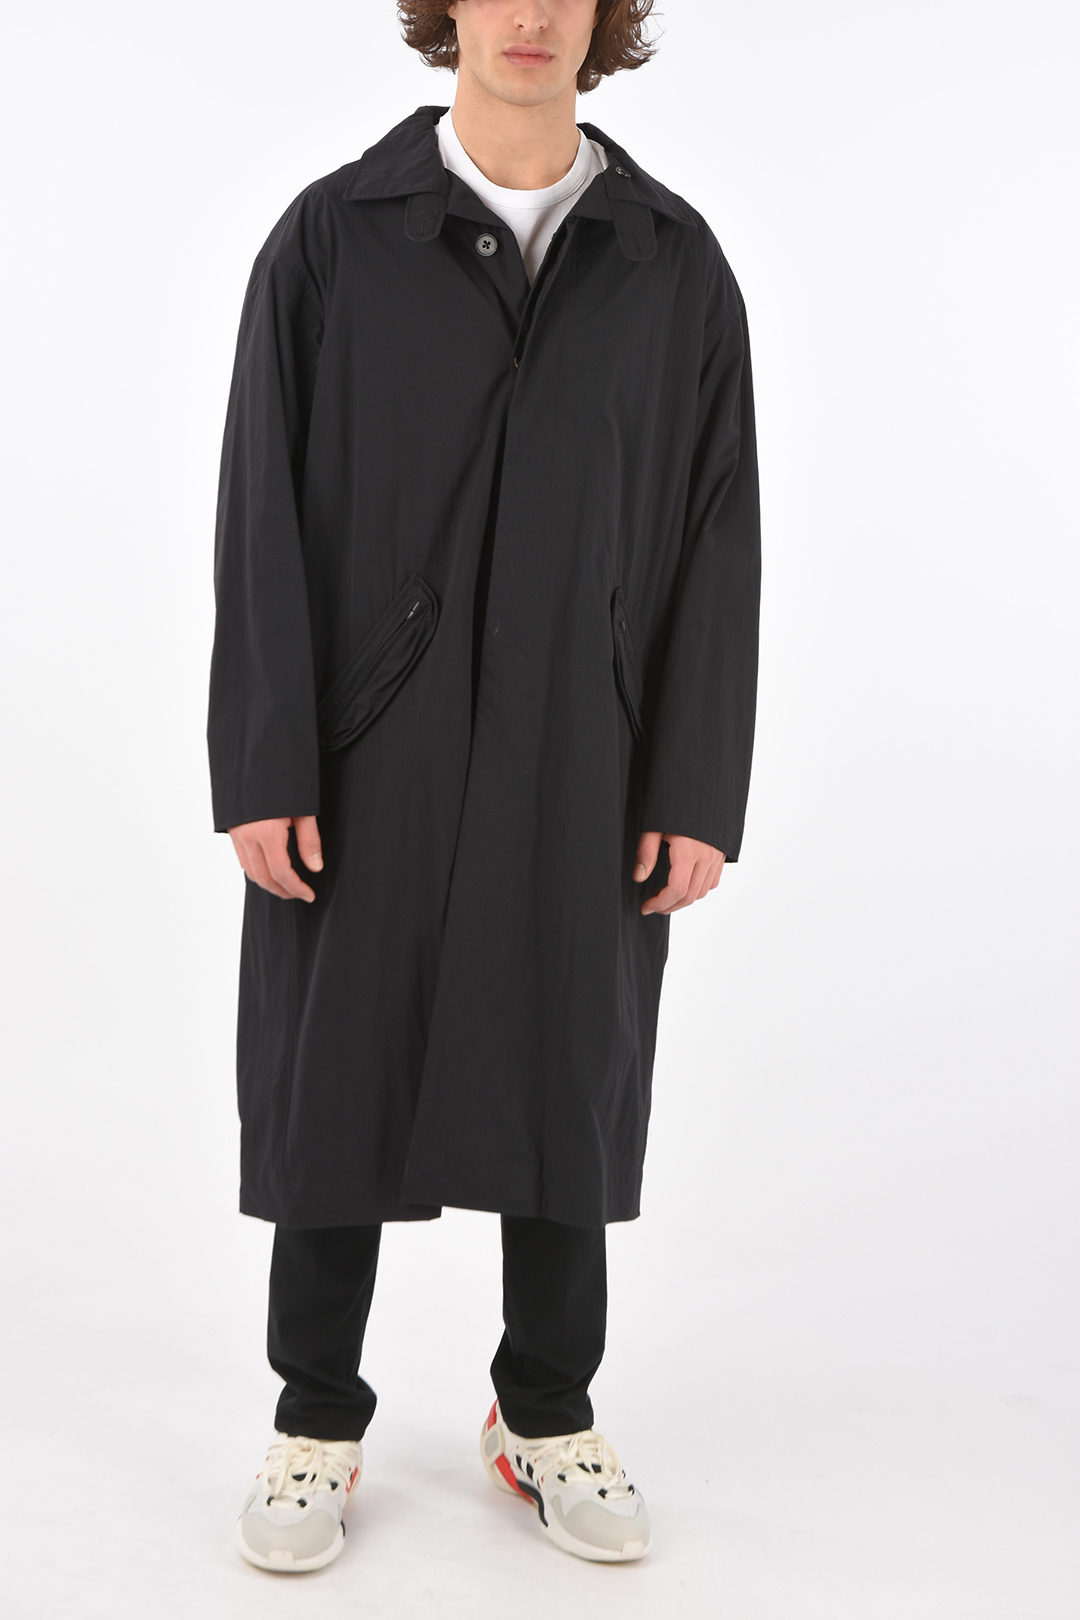 Damir Doma single breasted trench with belt men - Glamood Outlet